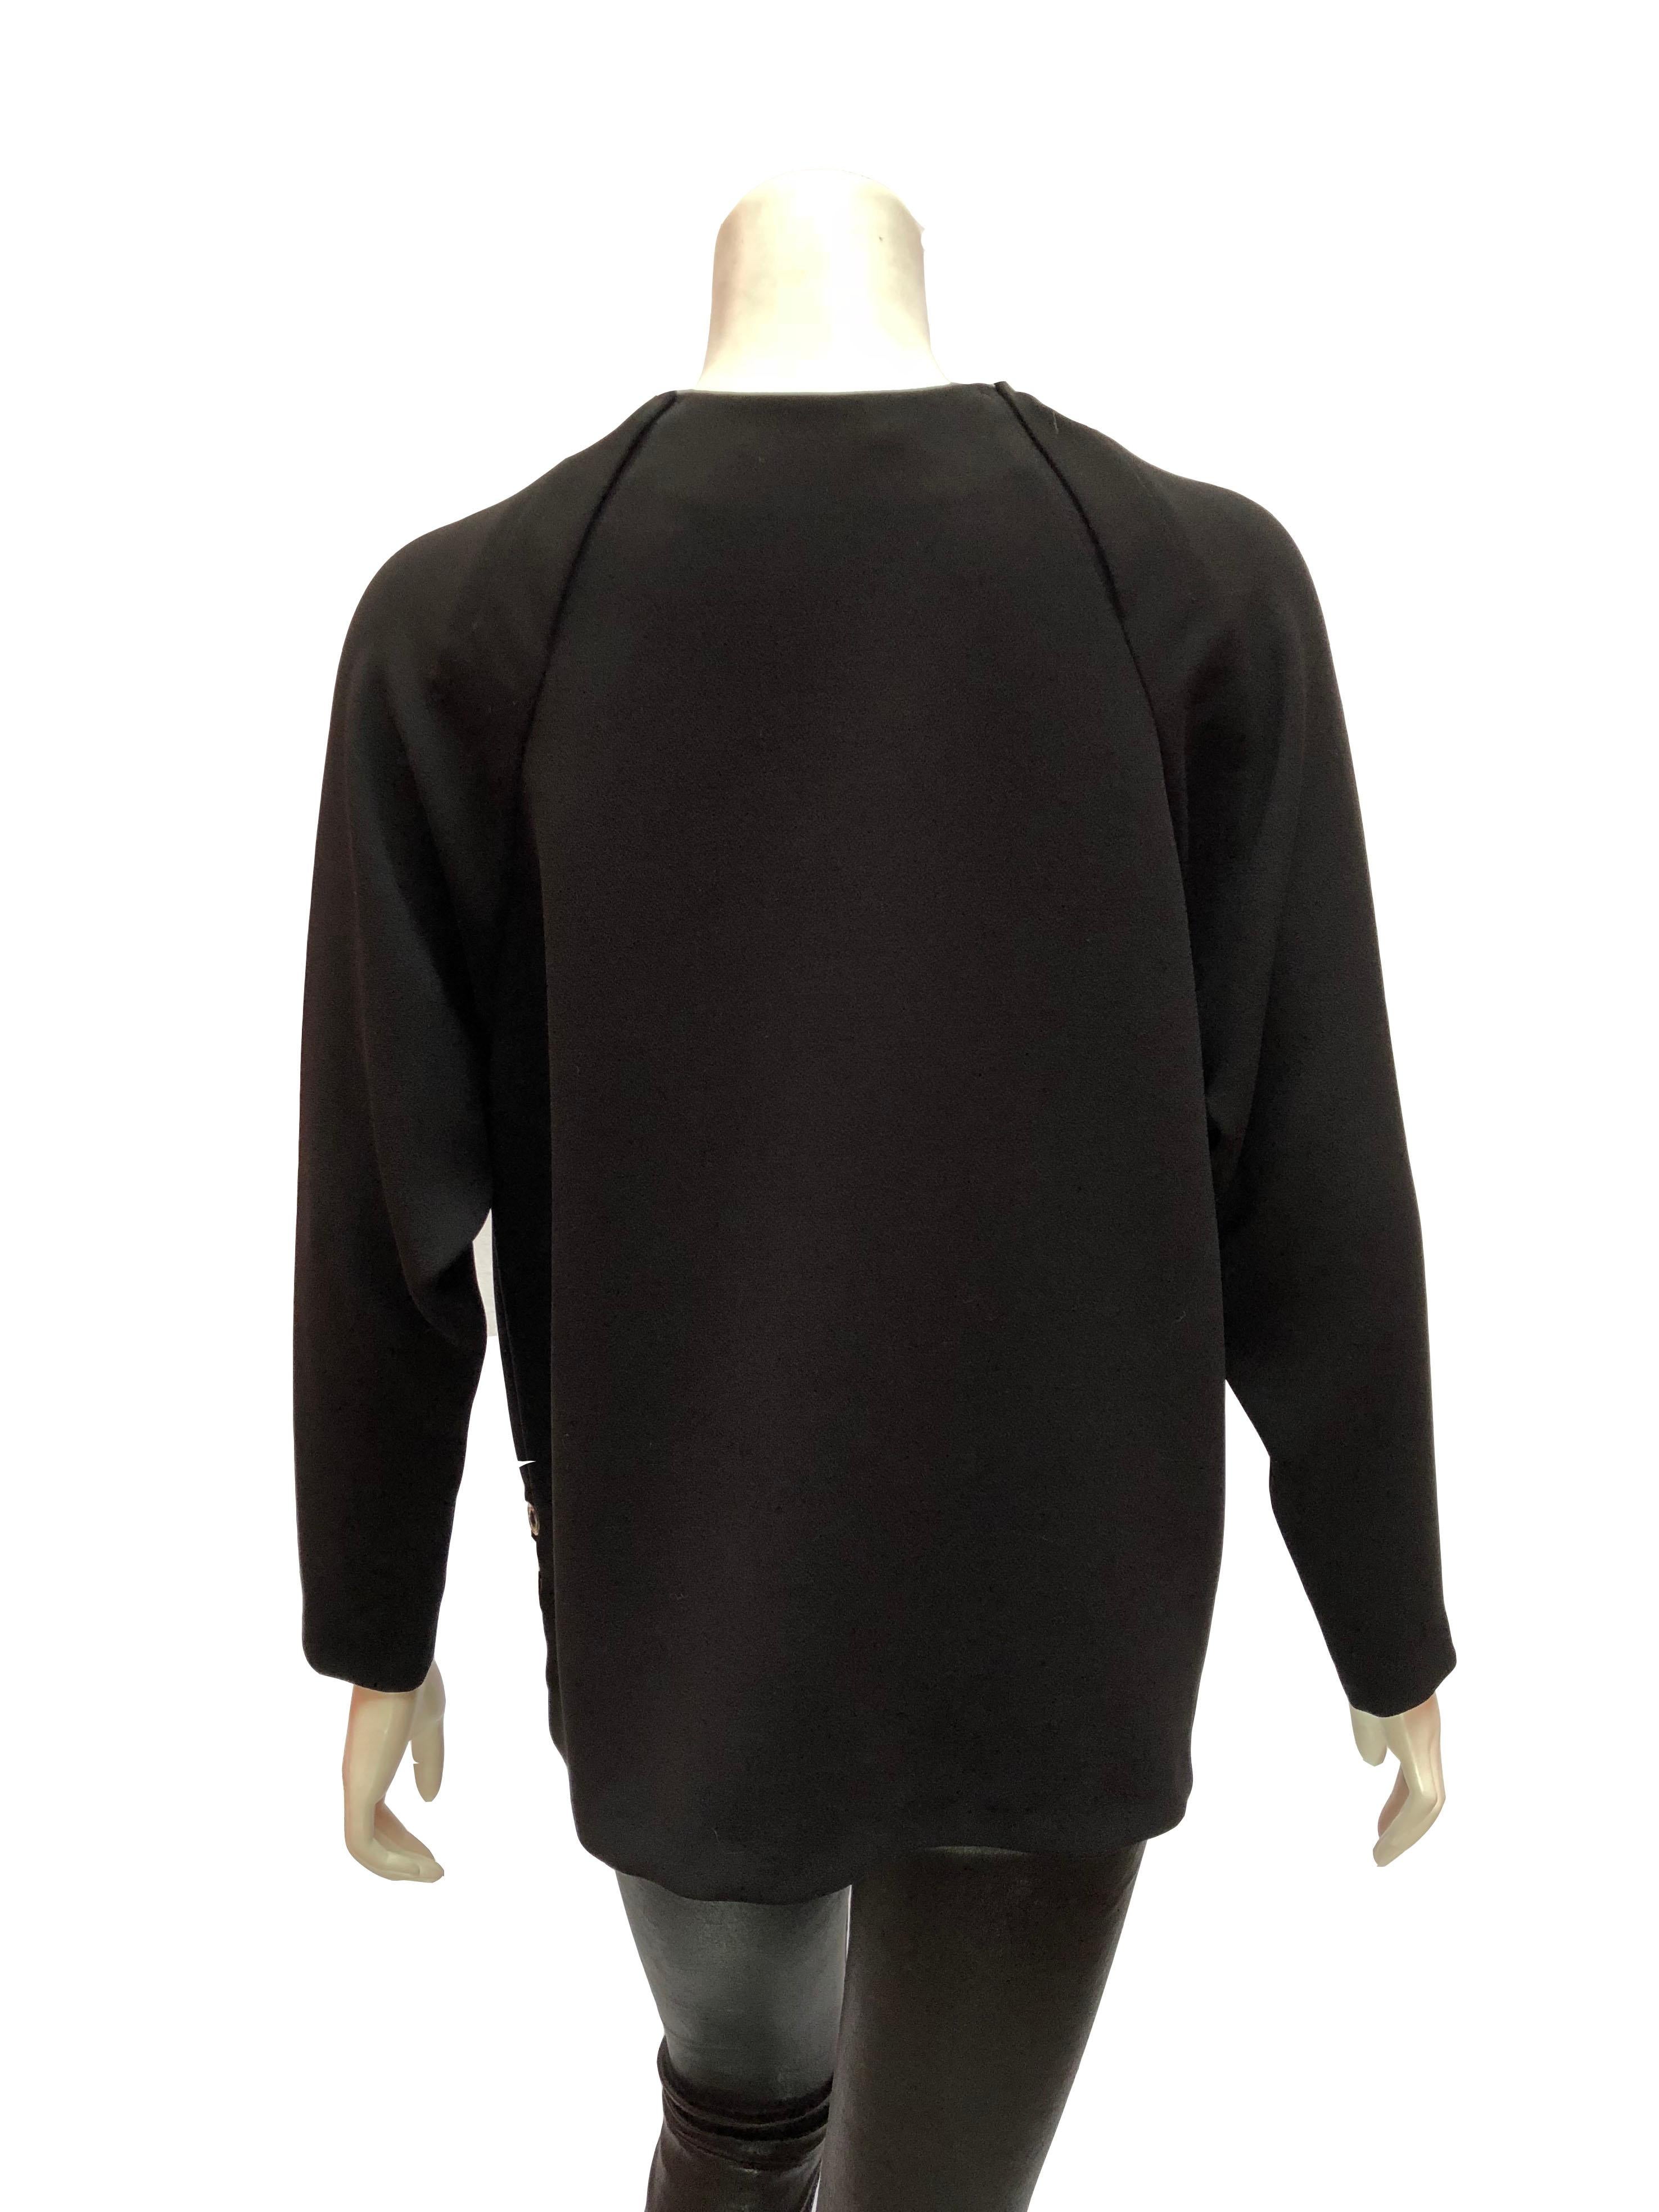 Anthony Vaccarello Black Long Sleeves Crepe Blouse
Thick crepe pull over blouse with silver grommet detail. 
Features crew neck and long sleeves
Size Large. 
